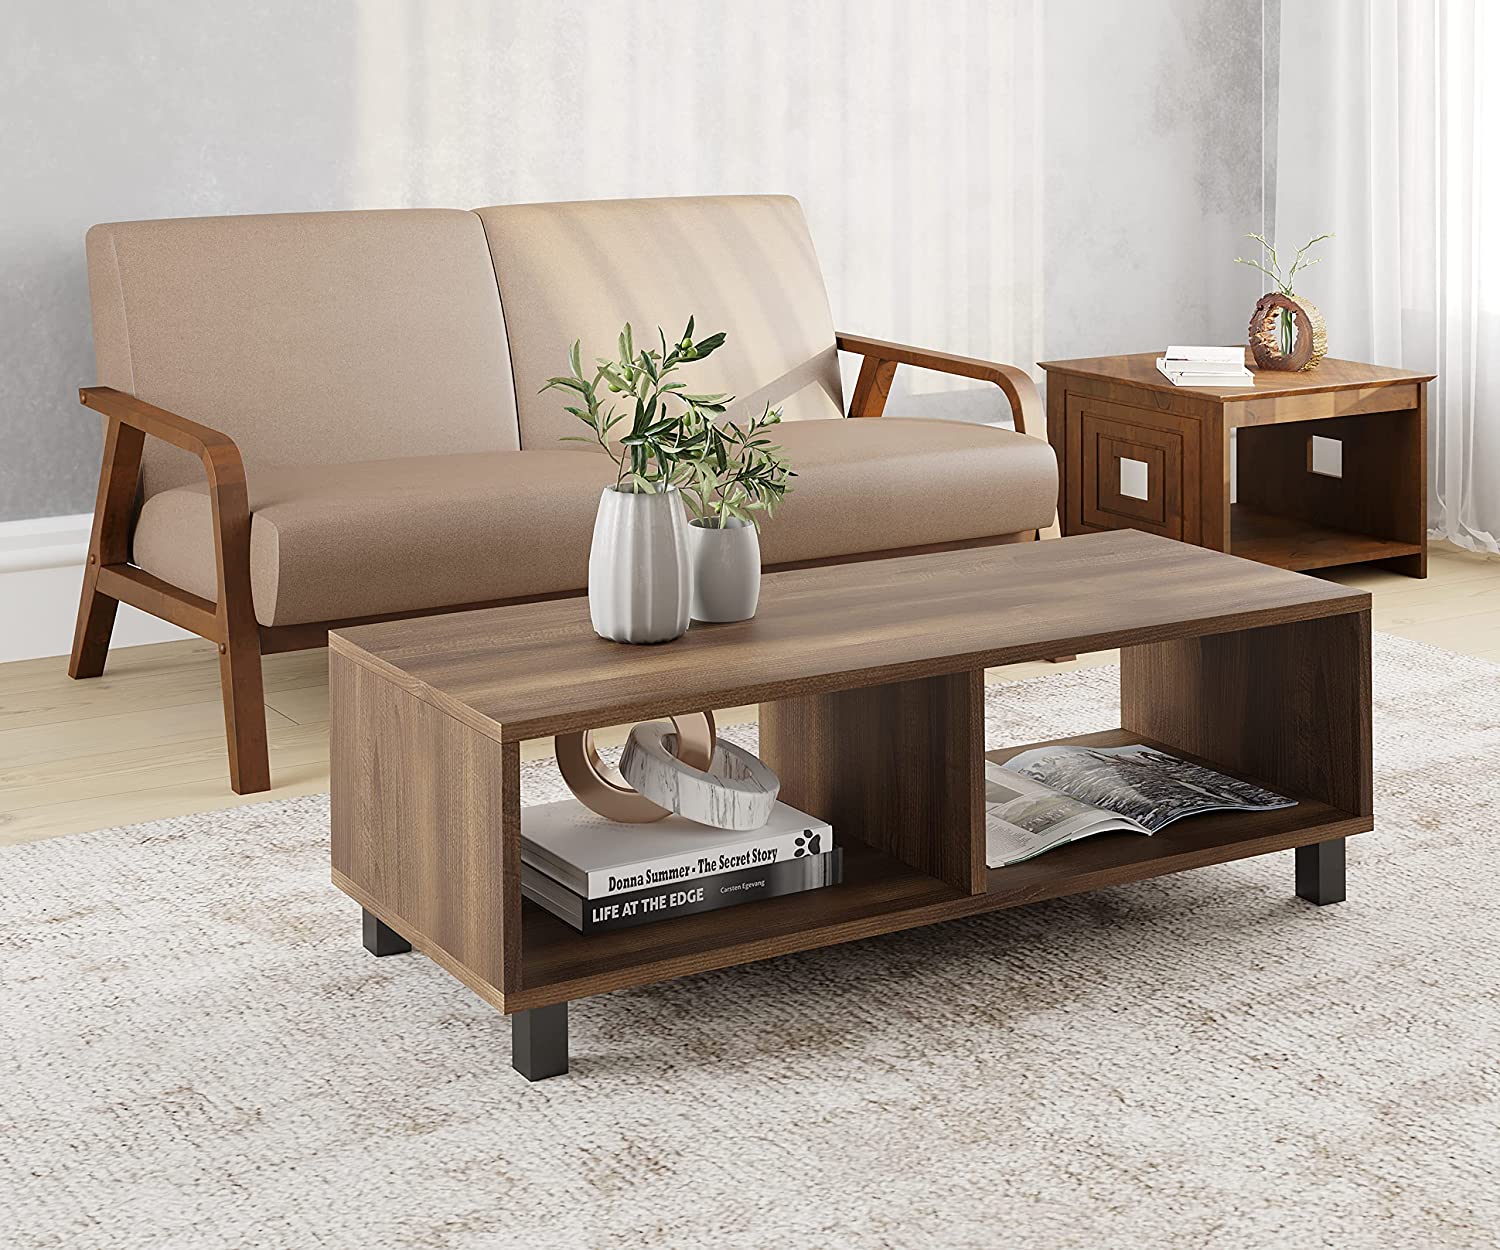 Center Table - Best Selling Furniture on Pepperfry